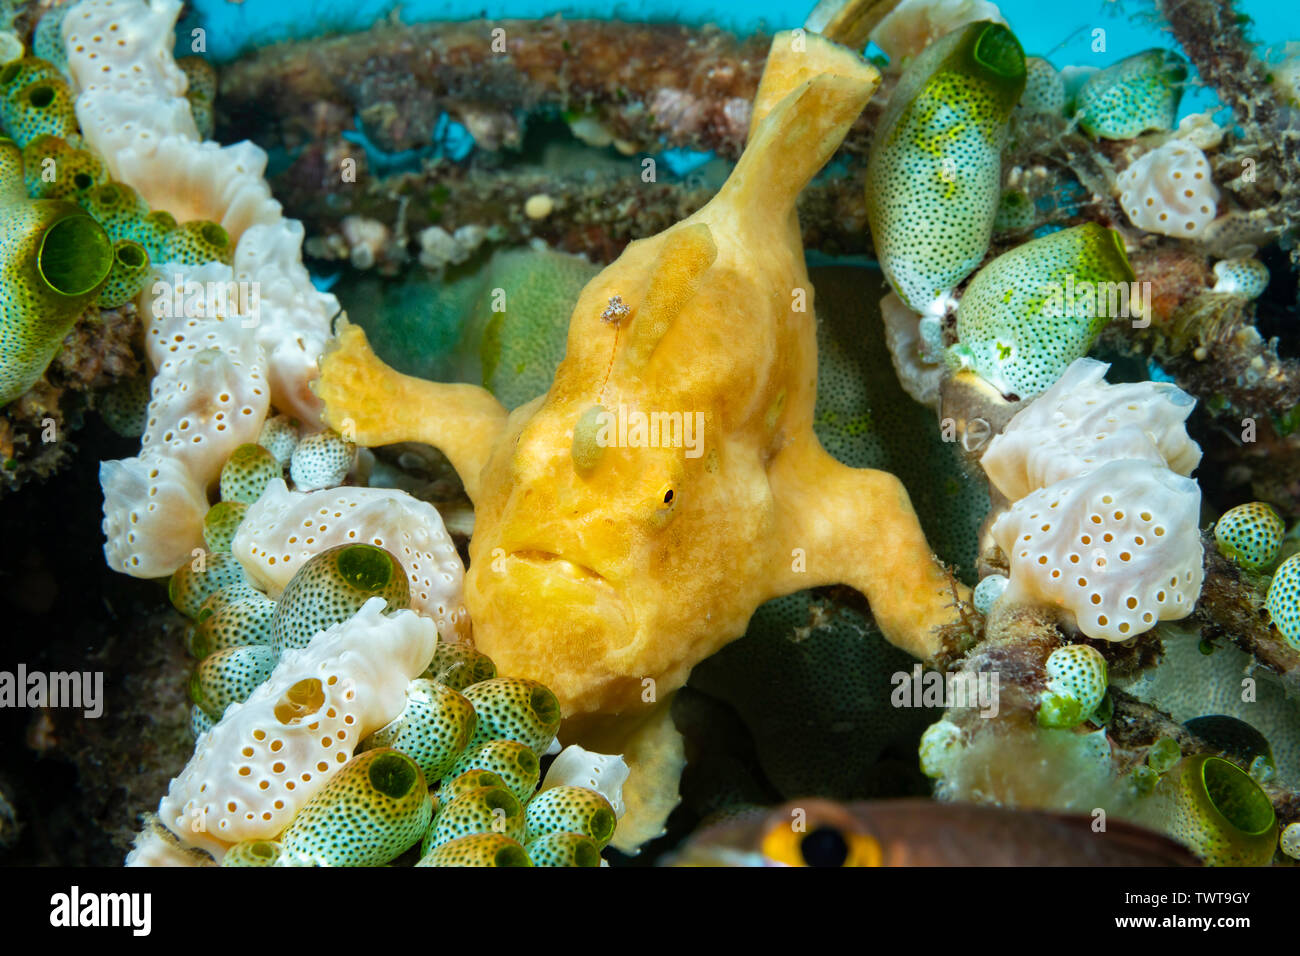 A warty frogfish, Antennarius maculatus, between to types of tunicates, Philippines. Stock Photo